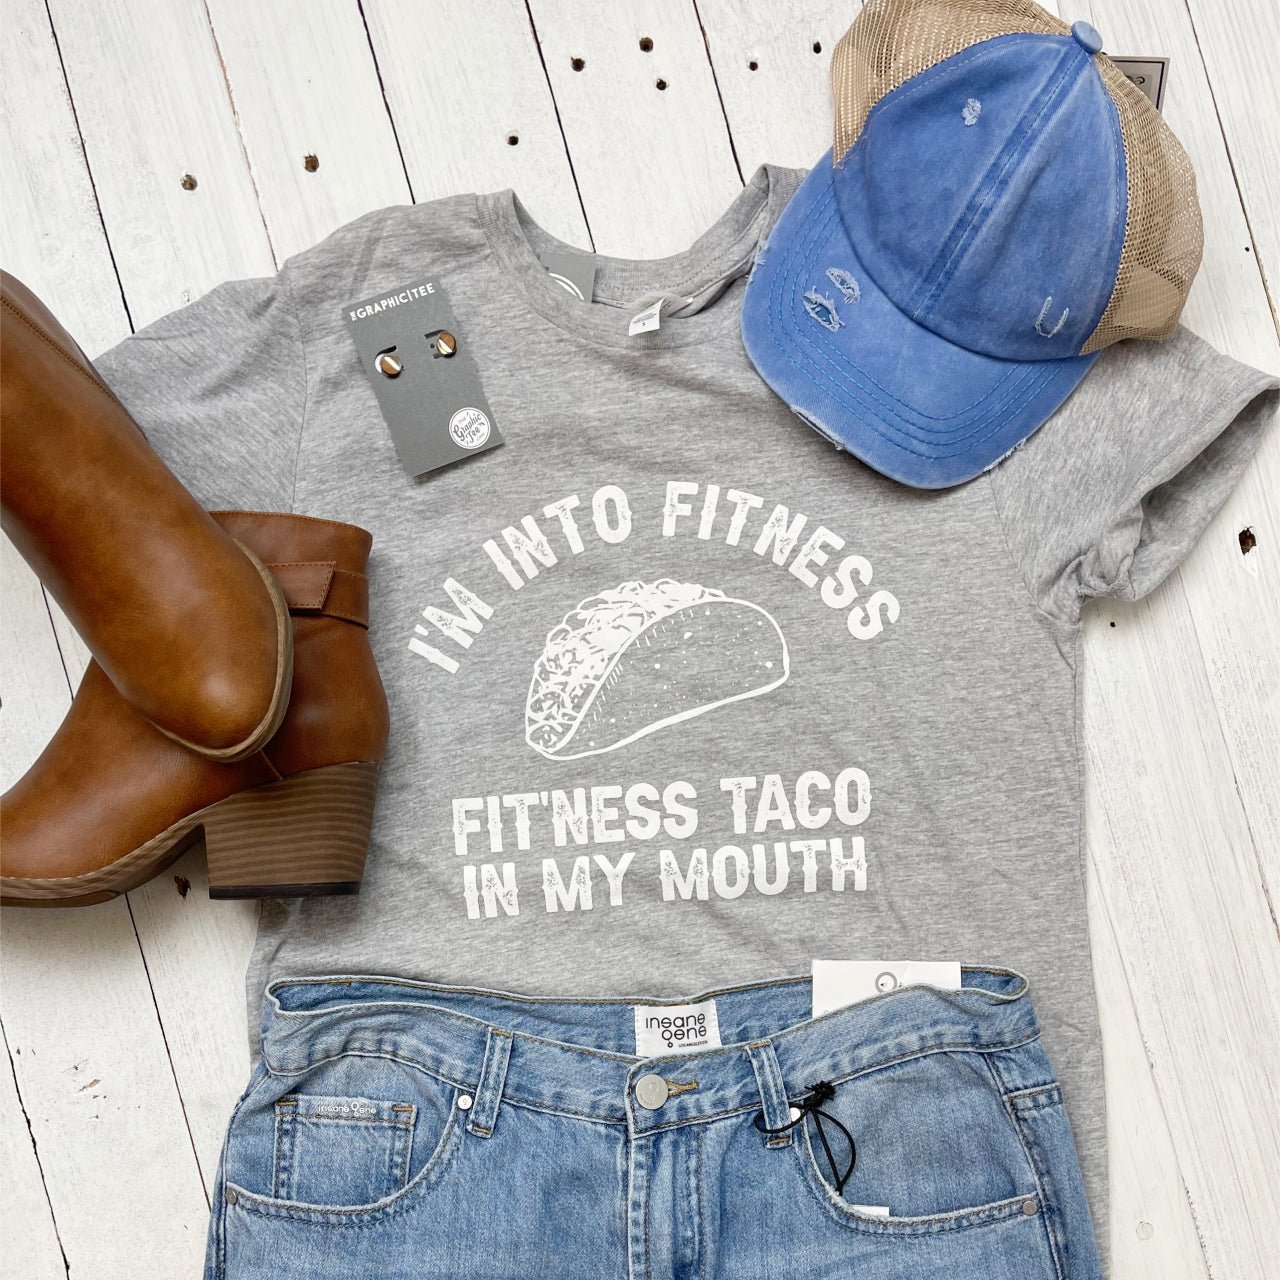 I'm Into Fitness Taco Crew Neck Gray Short Sleeve Graphic Tee - The Graphic Tee